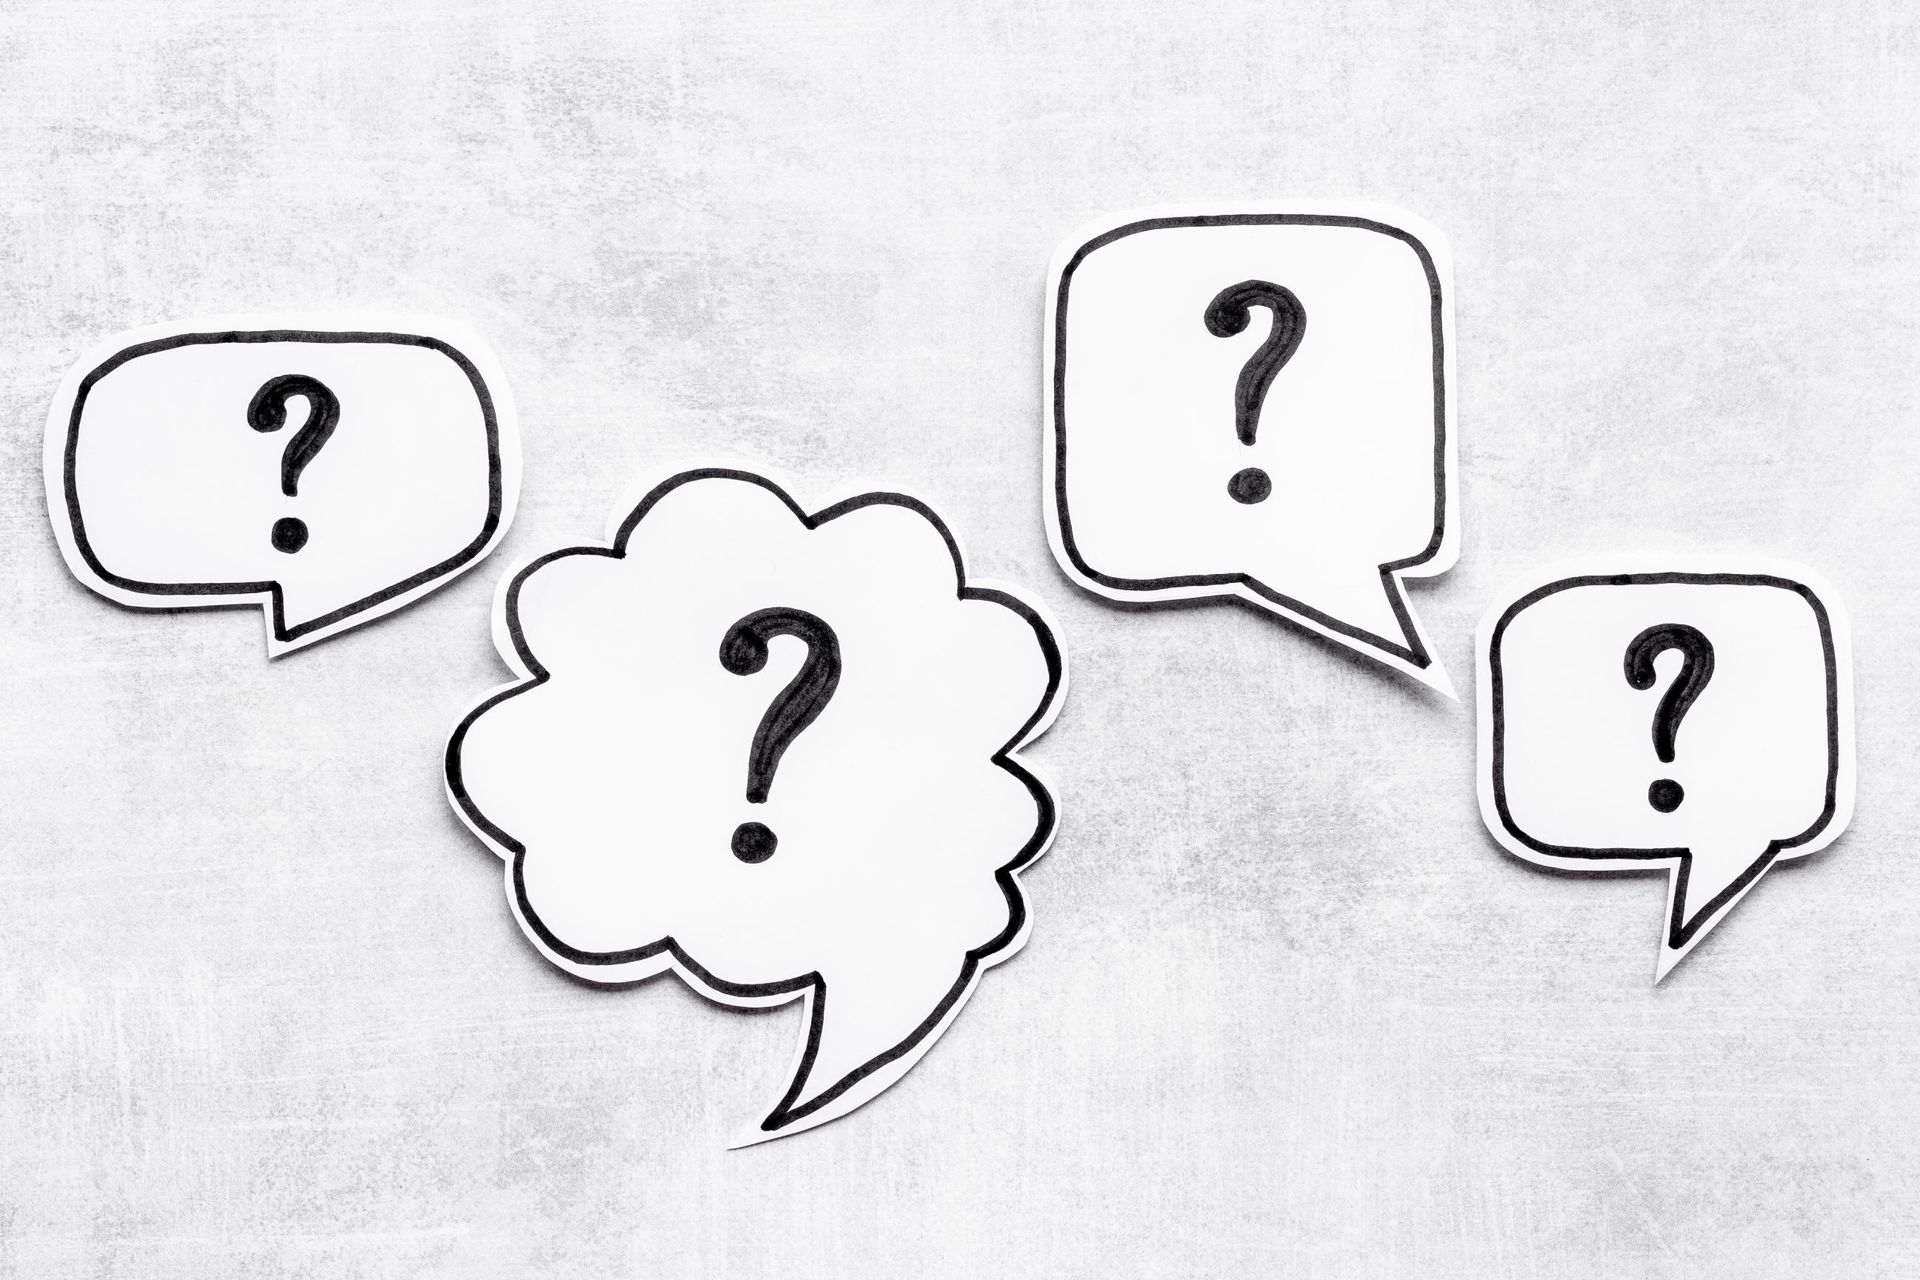 four speech bubbles with question marks on them